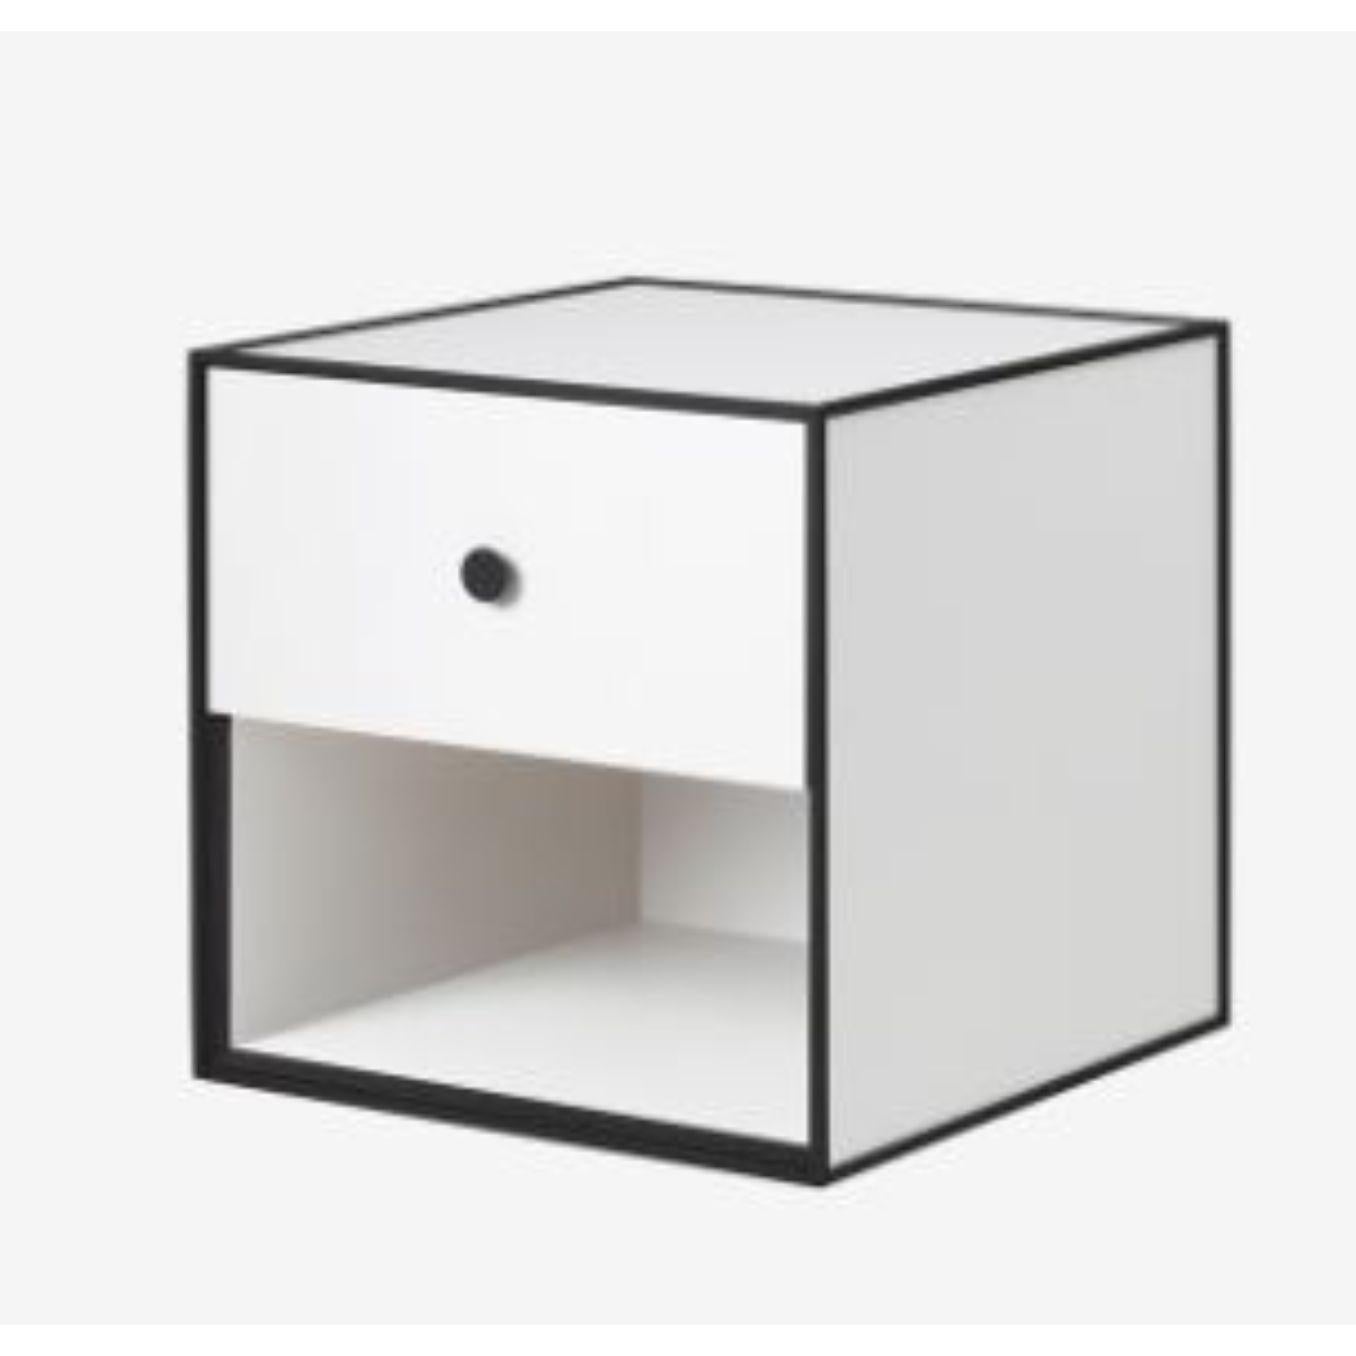 35 white frame box with 1 drawer by Lassen
Dimensions: W 35 x D 35 x H 35 cm
Materials: Finér, Melamin, Melamin, Melamine, Metal, Veneer,
Also available in different colours and dimensions.

By Lassen is a Danish design brand focused on iconic